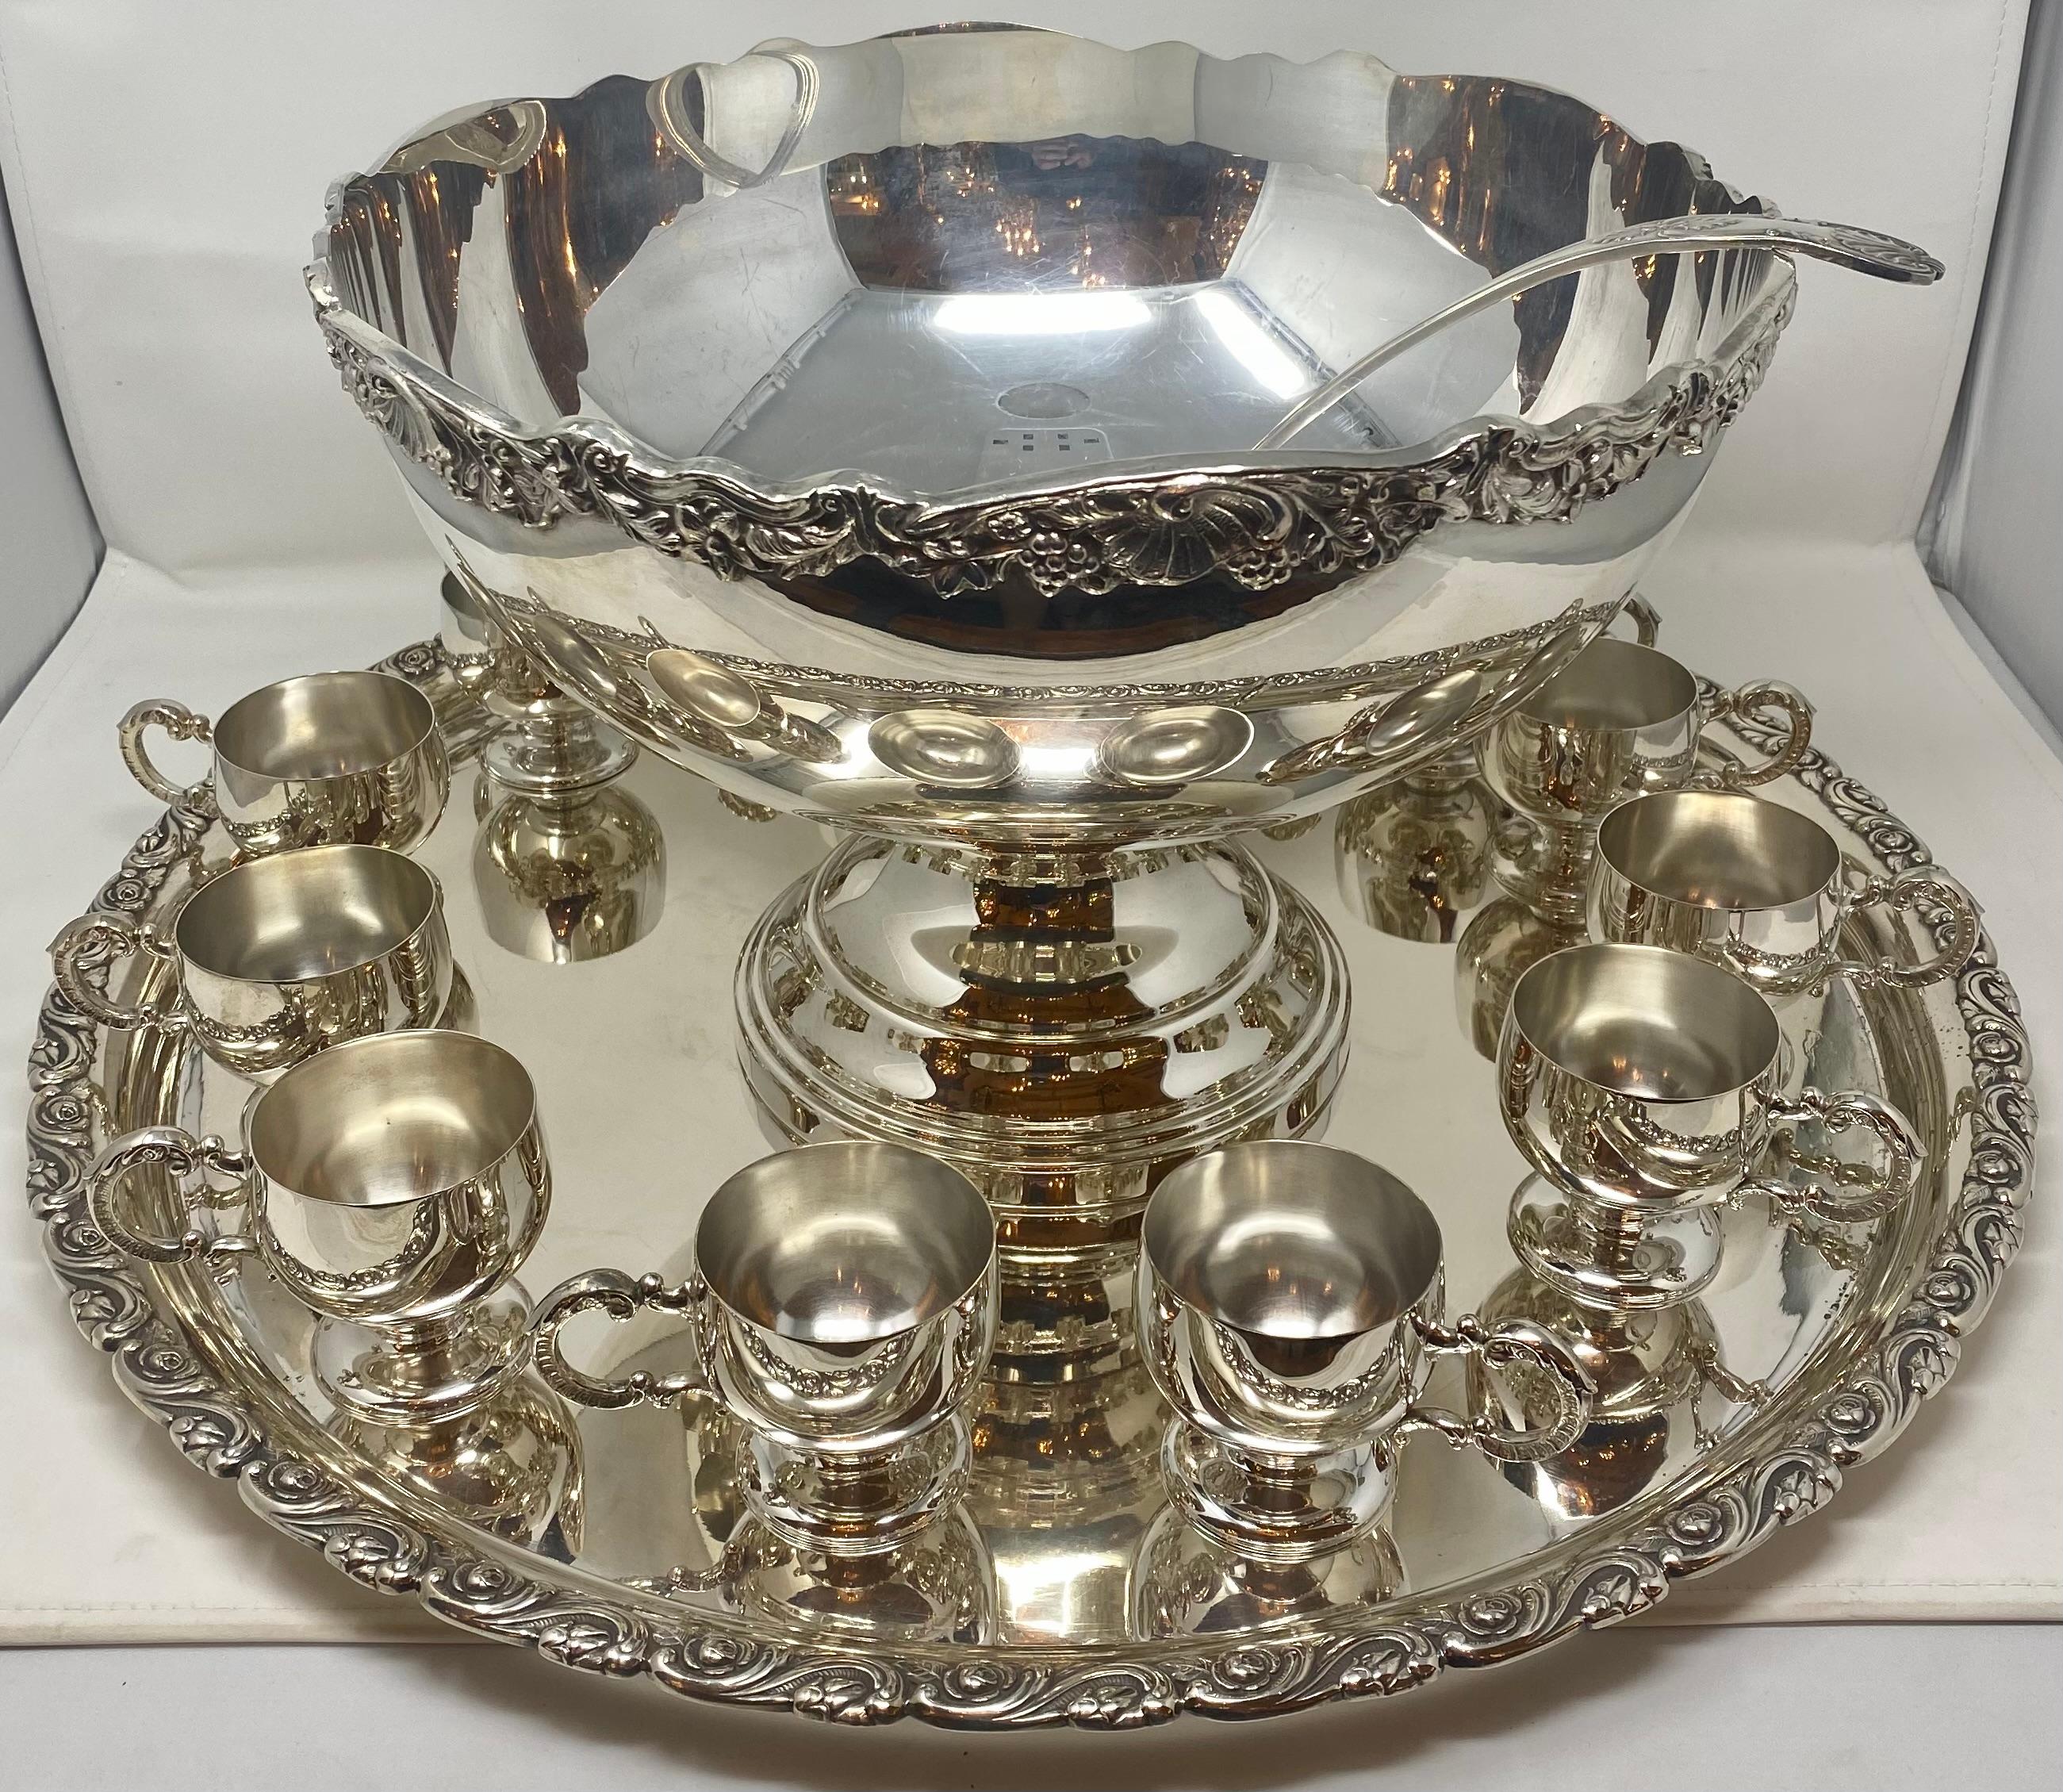 Estate silver-plated 15 piece punch bowl service with cups, tray and ladle. Wonderful for entertaining.
Overall: 10-1/2